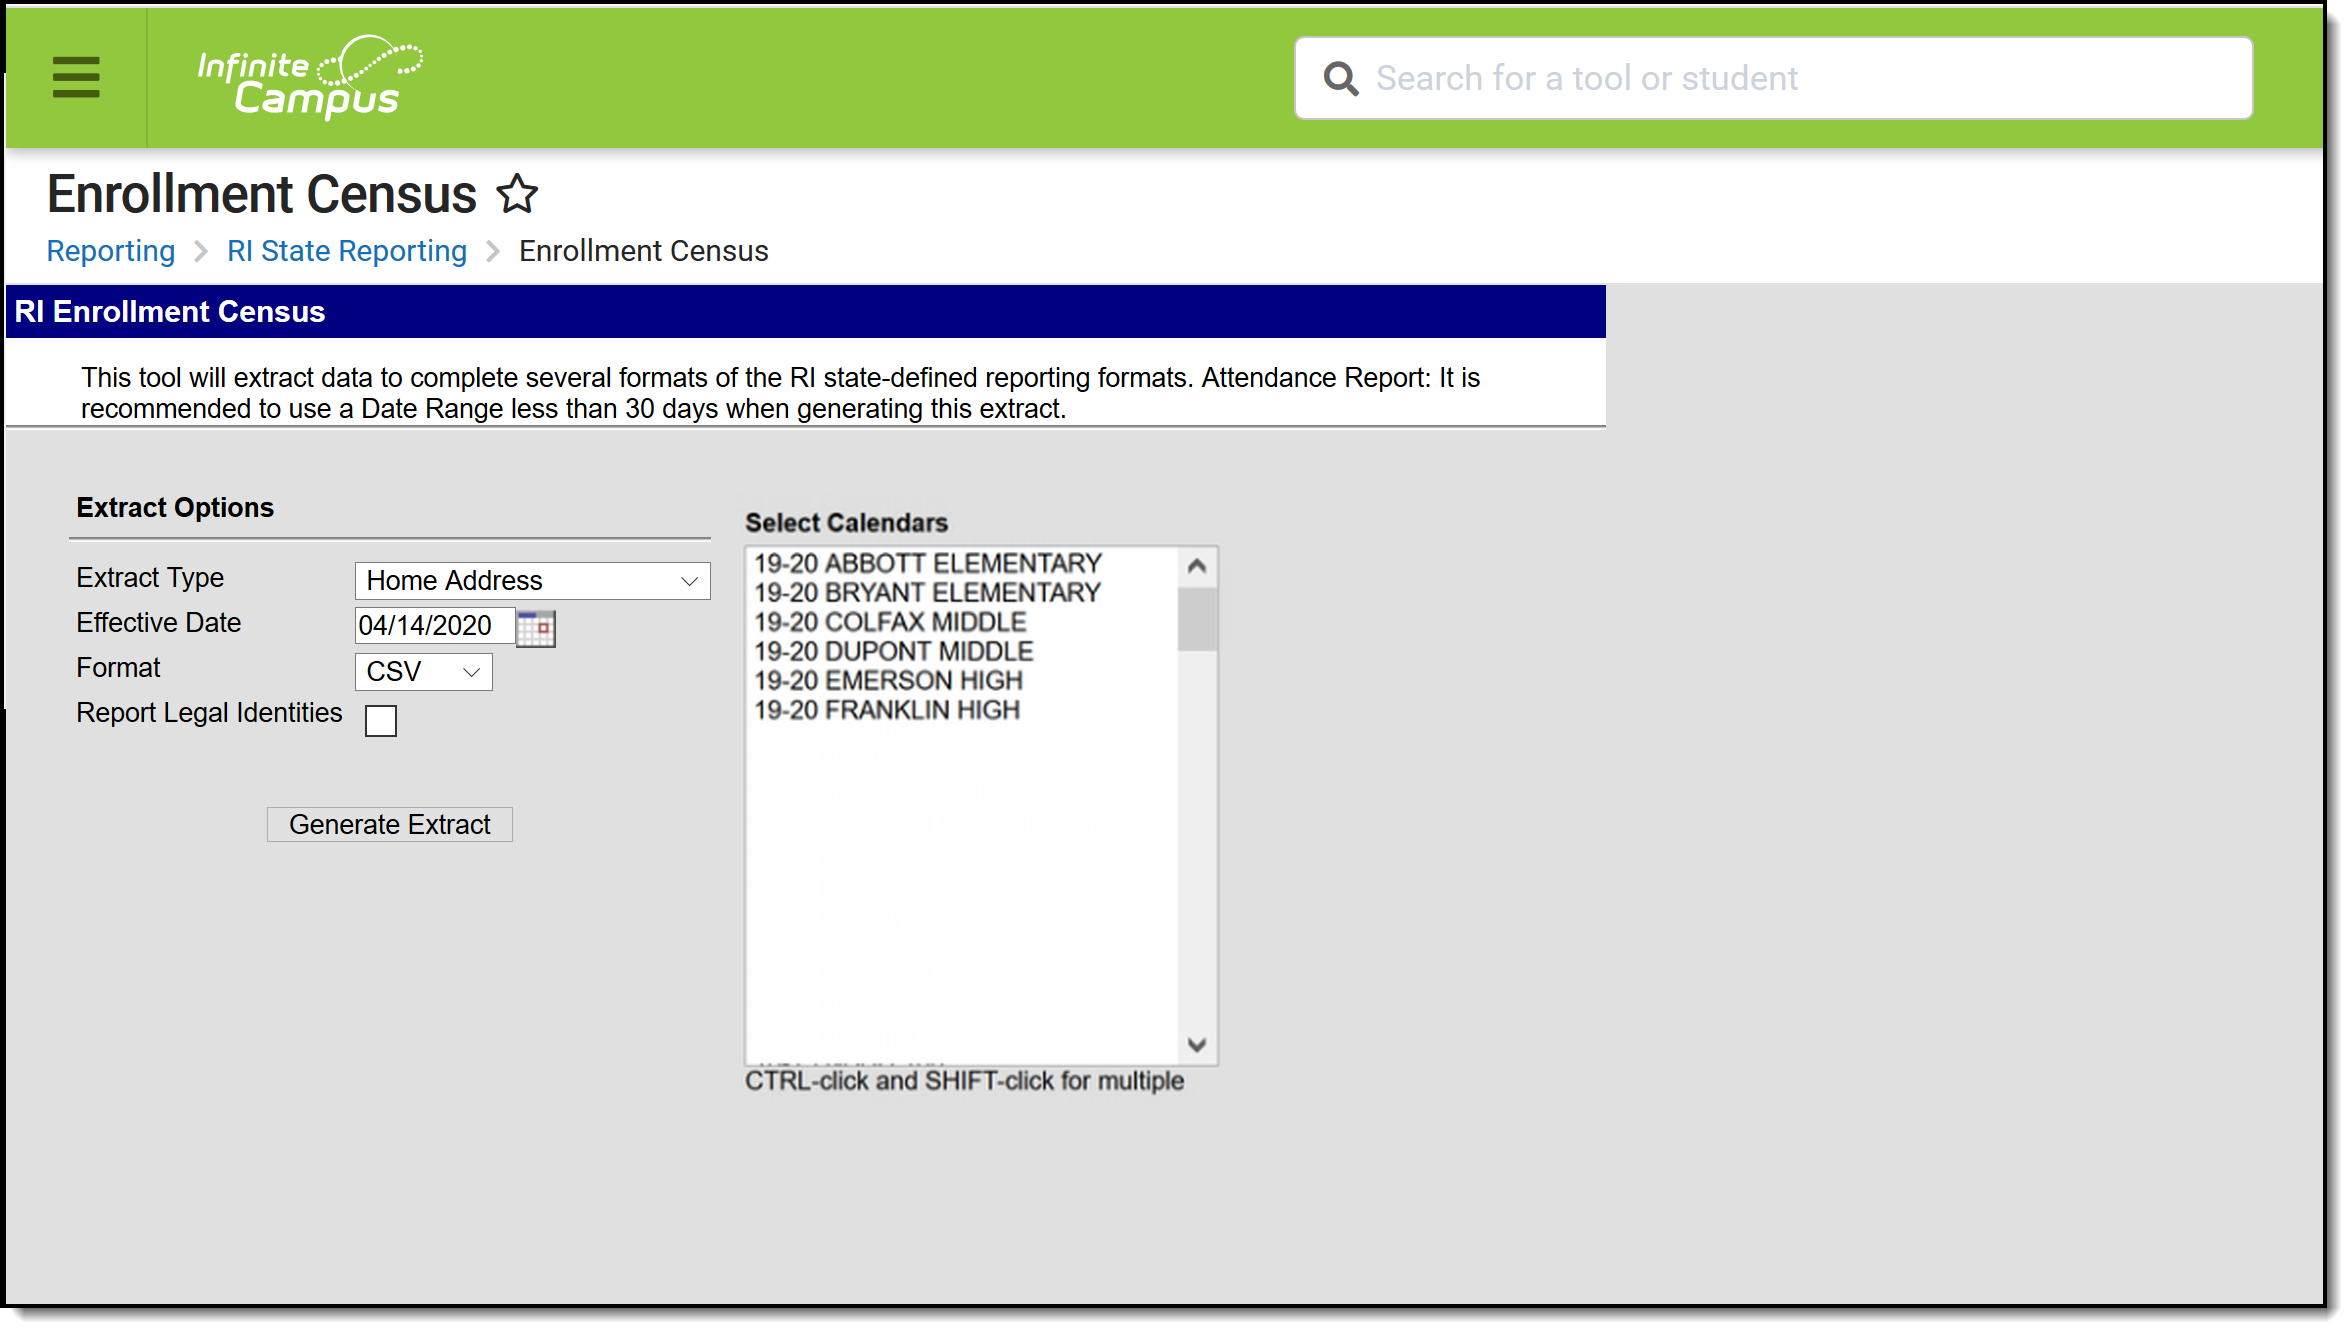 Screenshot of the Enrollment Census Home Address extract editor.